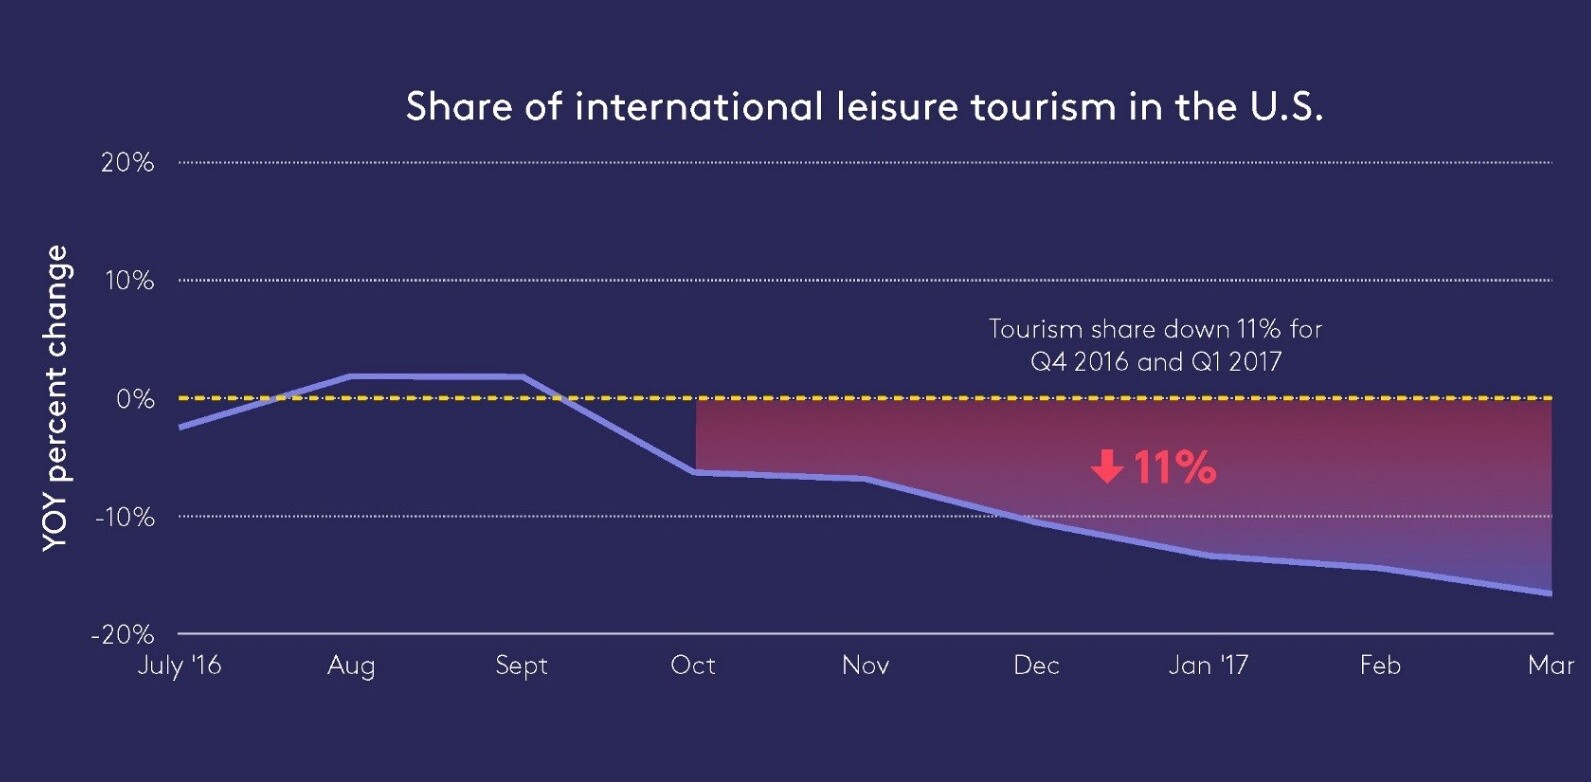 Foursquare data suggests tourism to US is plummeting